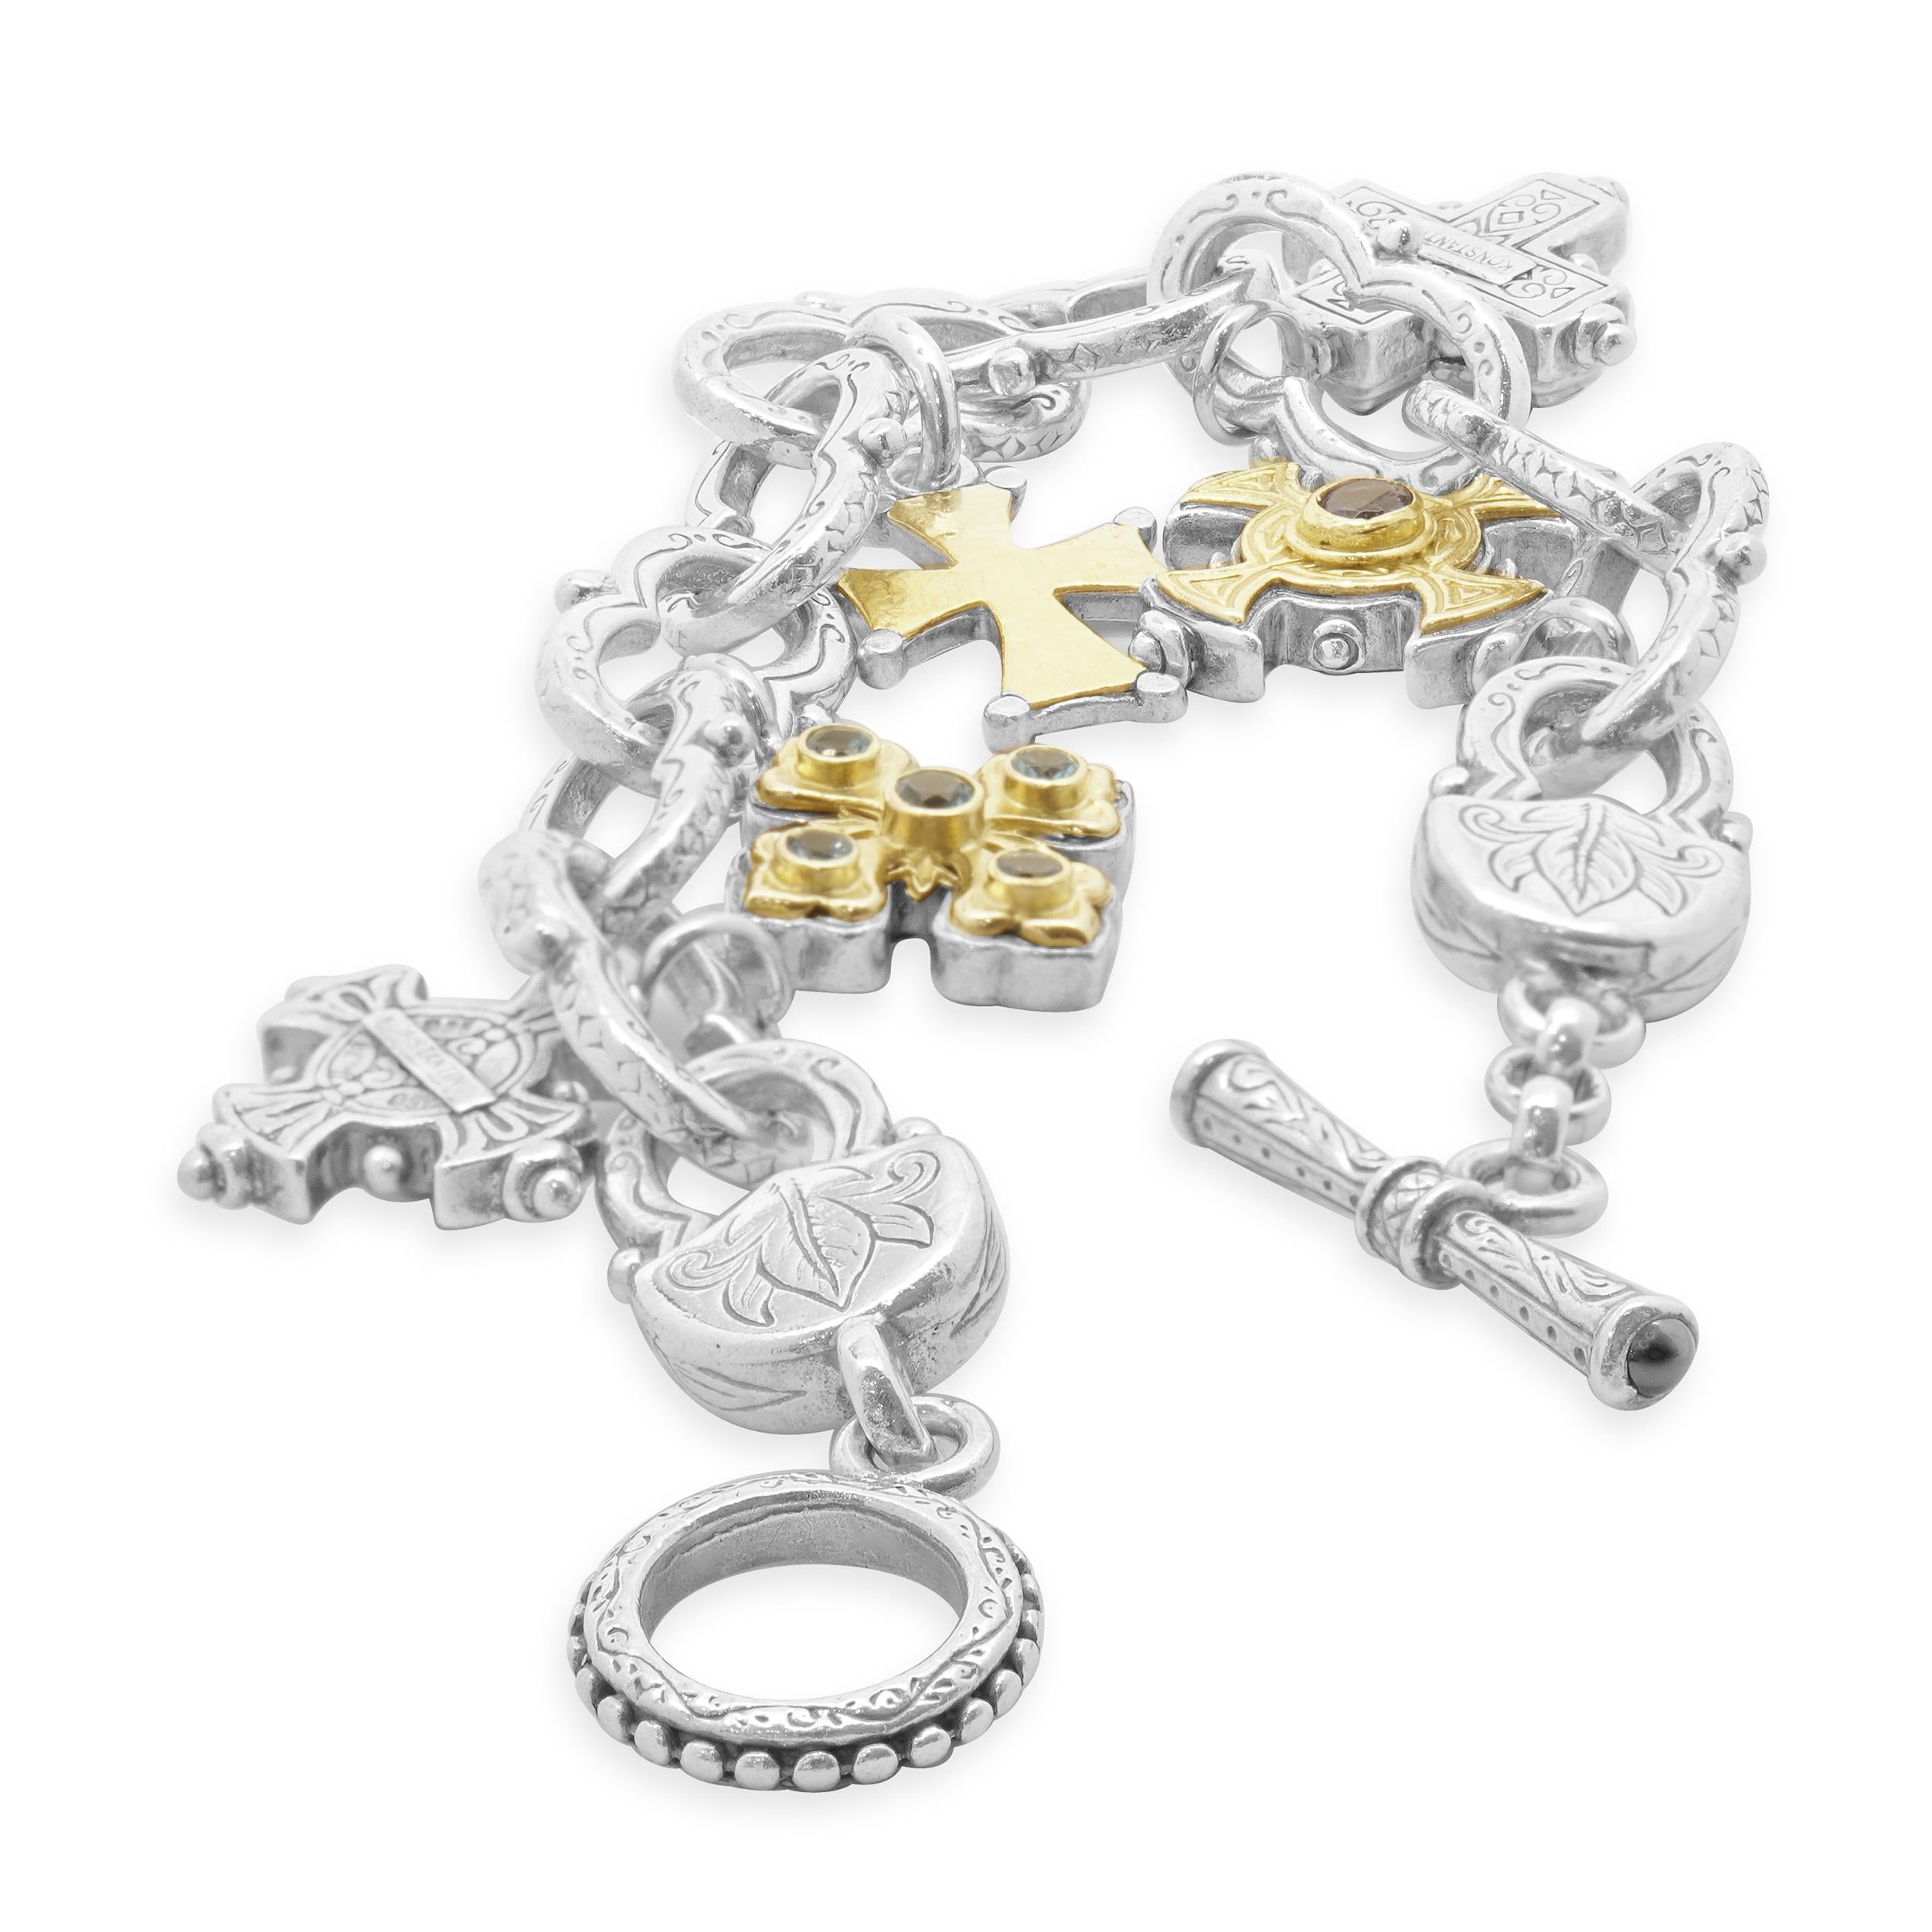 Designer: Konstantino
Material: sterling silver / 18K yellow gold 
Dimensions: bracelet will fit a 7-inch wrist
Weight: 59.38 grams
